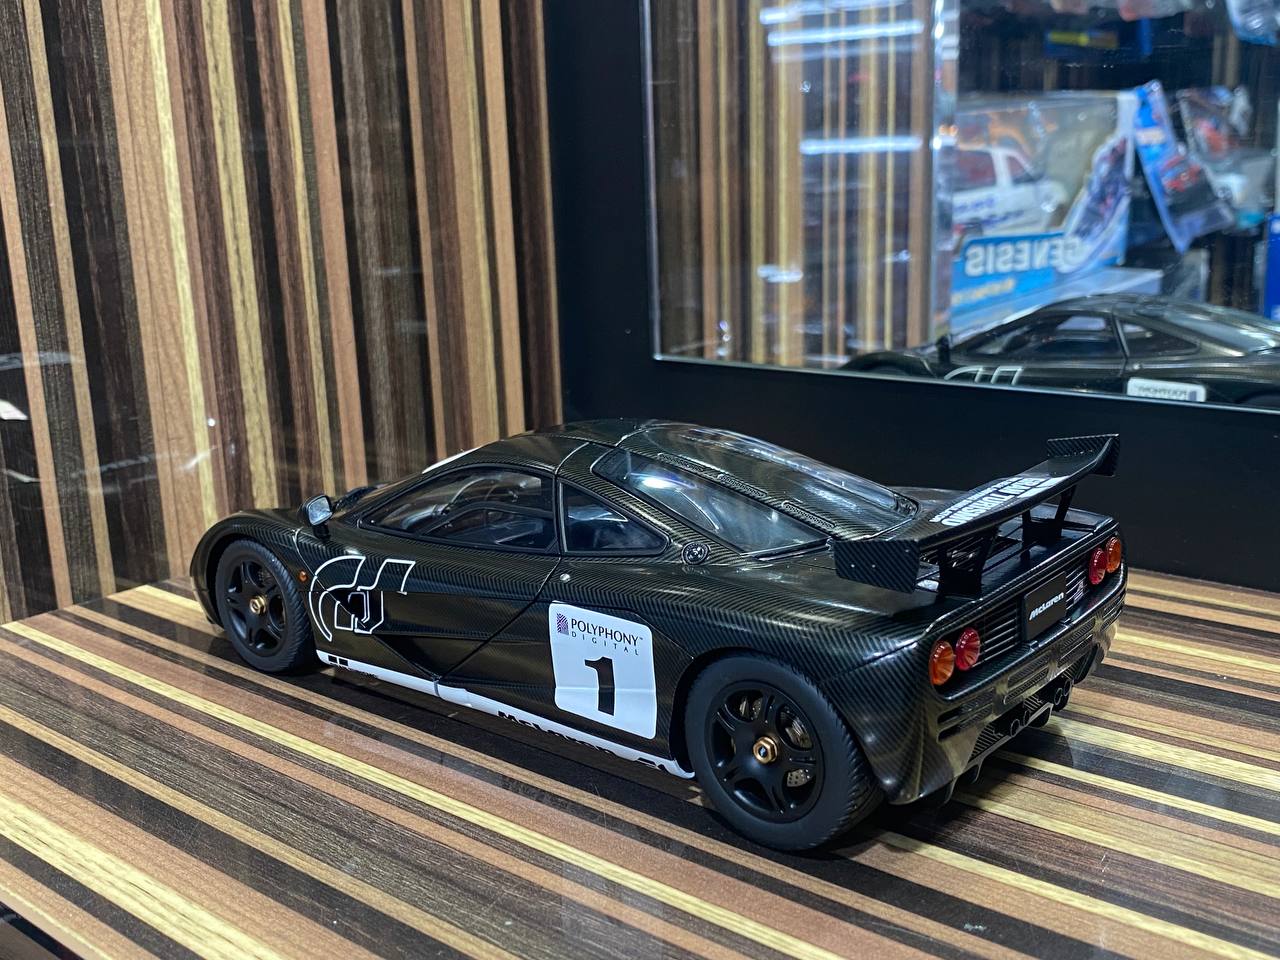 1/18 Diecast McLaren F1 Stealth Model (Gran Turismo GT5) - All Opening by Autoart